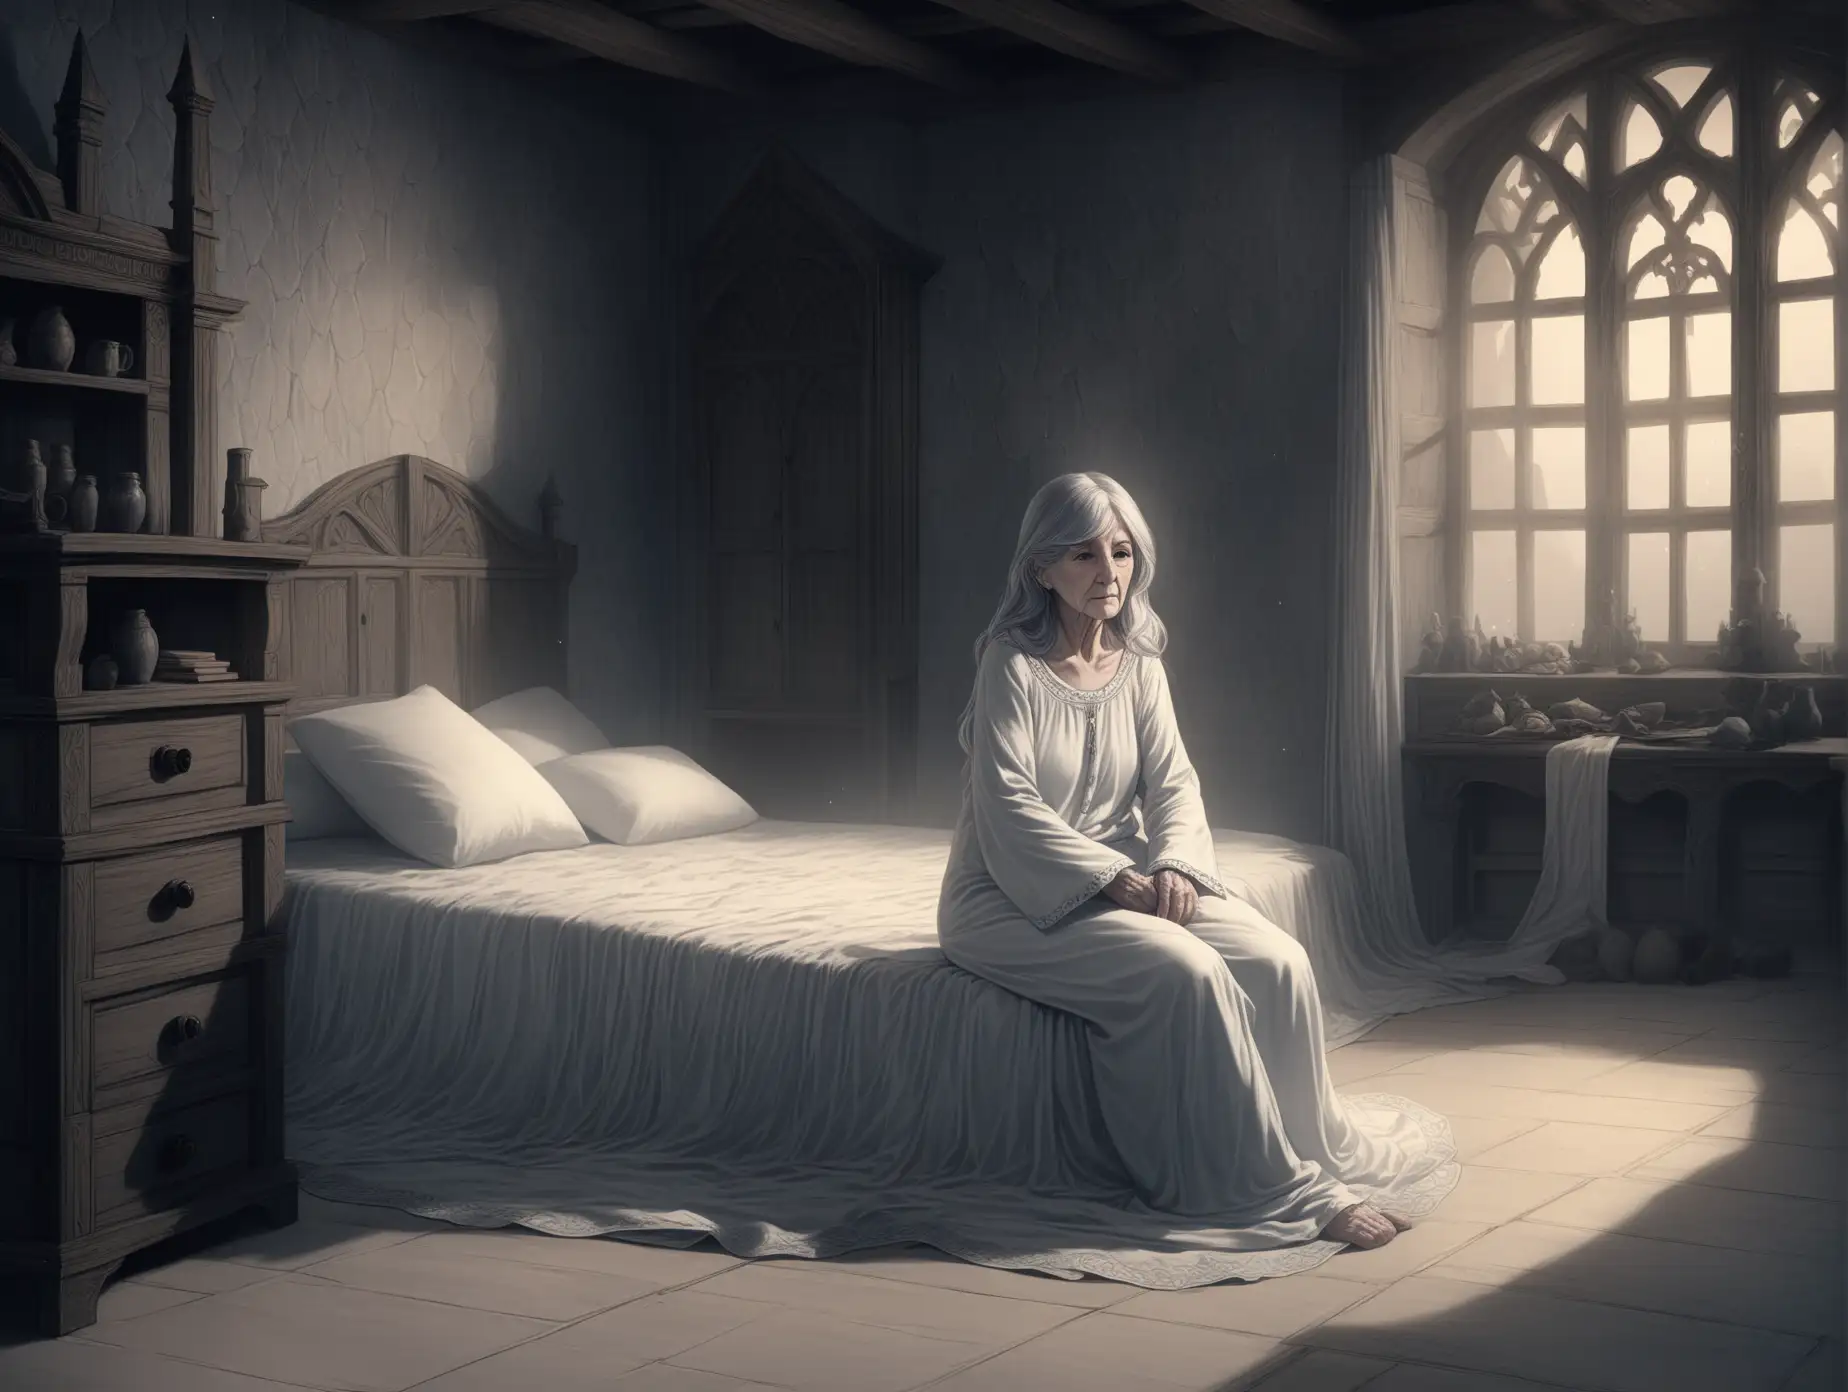 Elderly-Womans-Final-Moments-in-MedievalStyled-Room